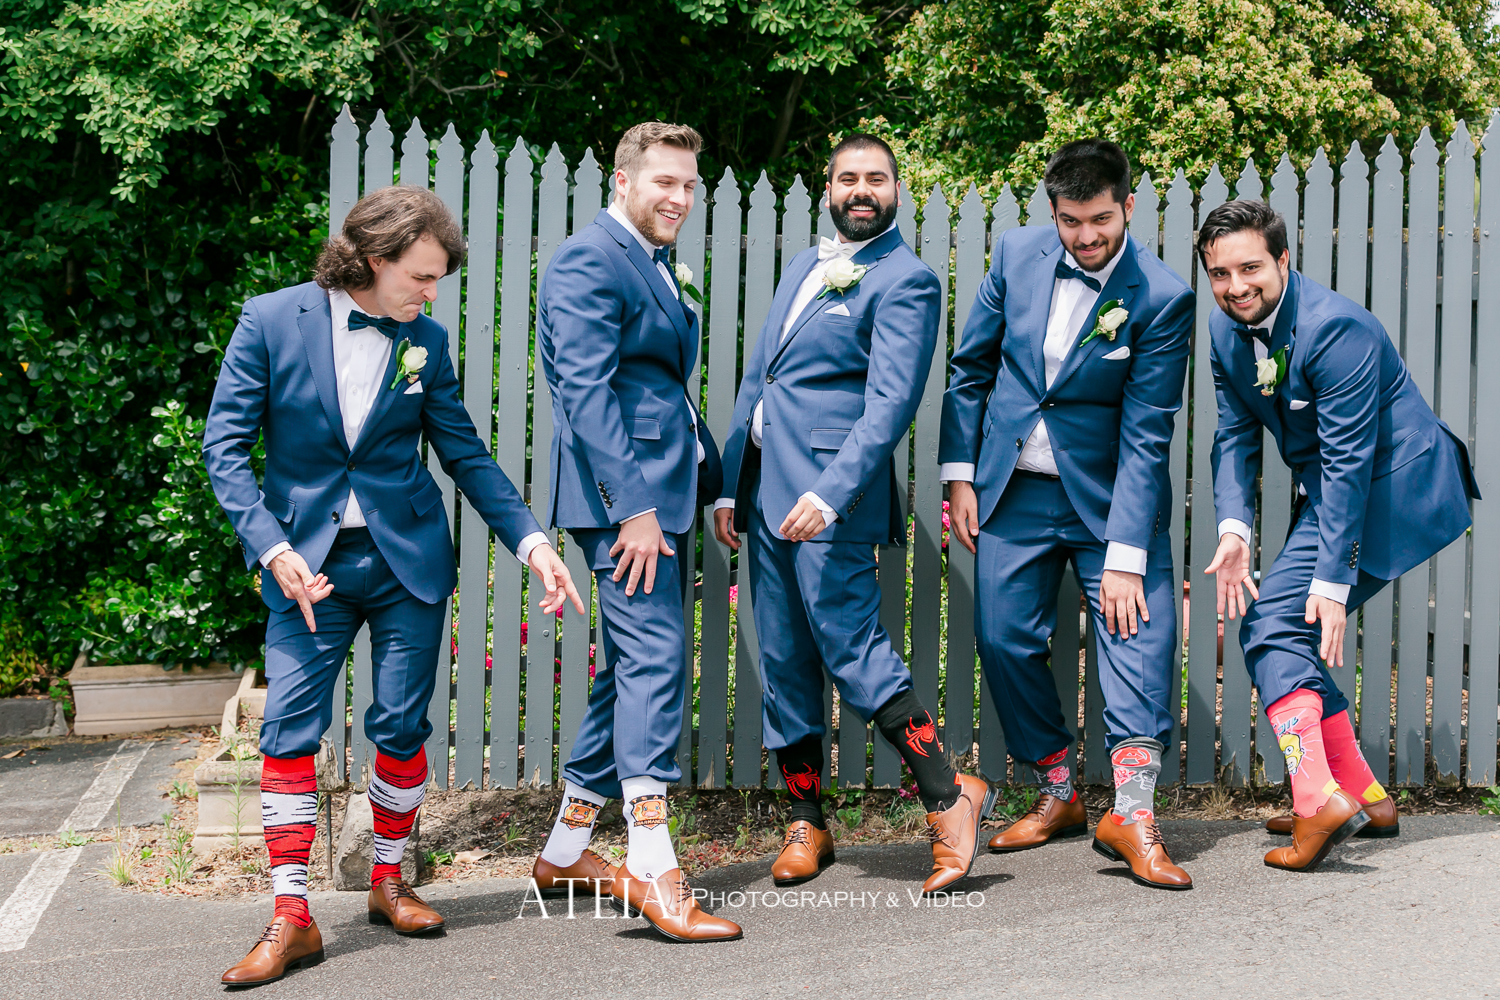 , Elizabethan Lodge Wedding Photography Melbourne by ATEIA Photography &#038; Video